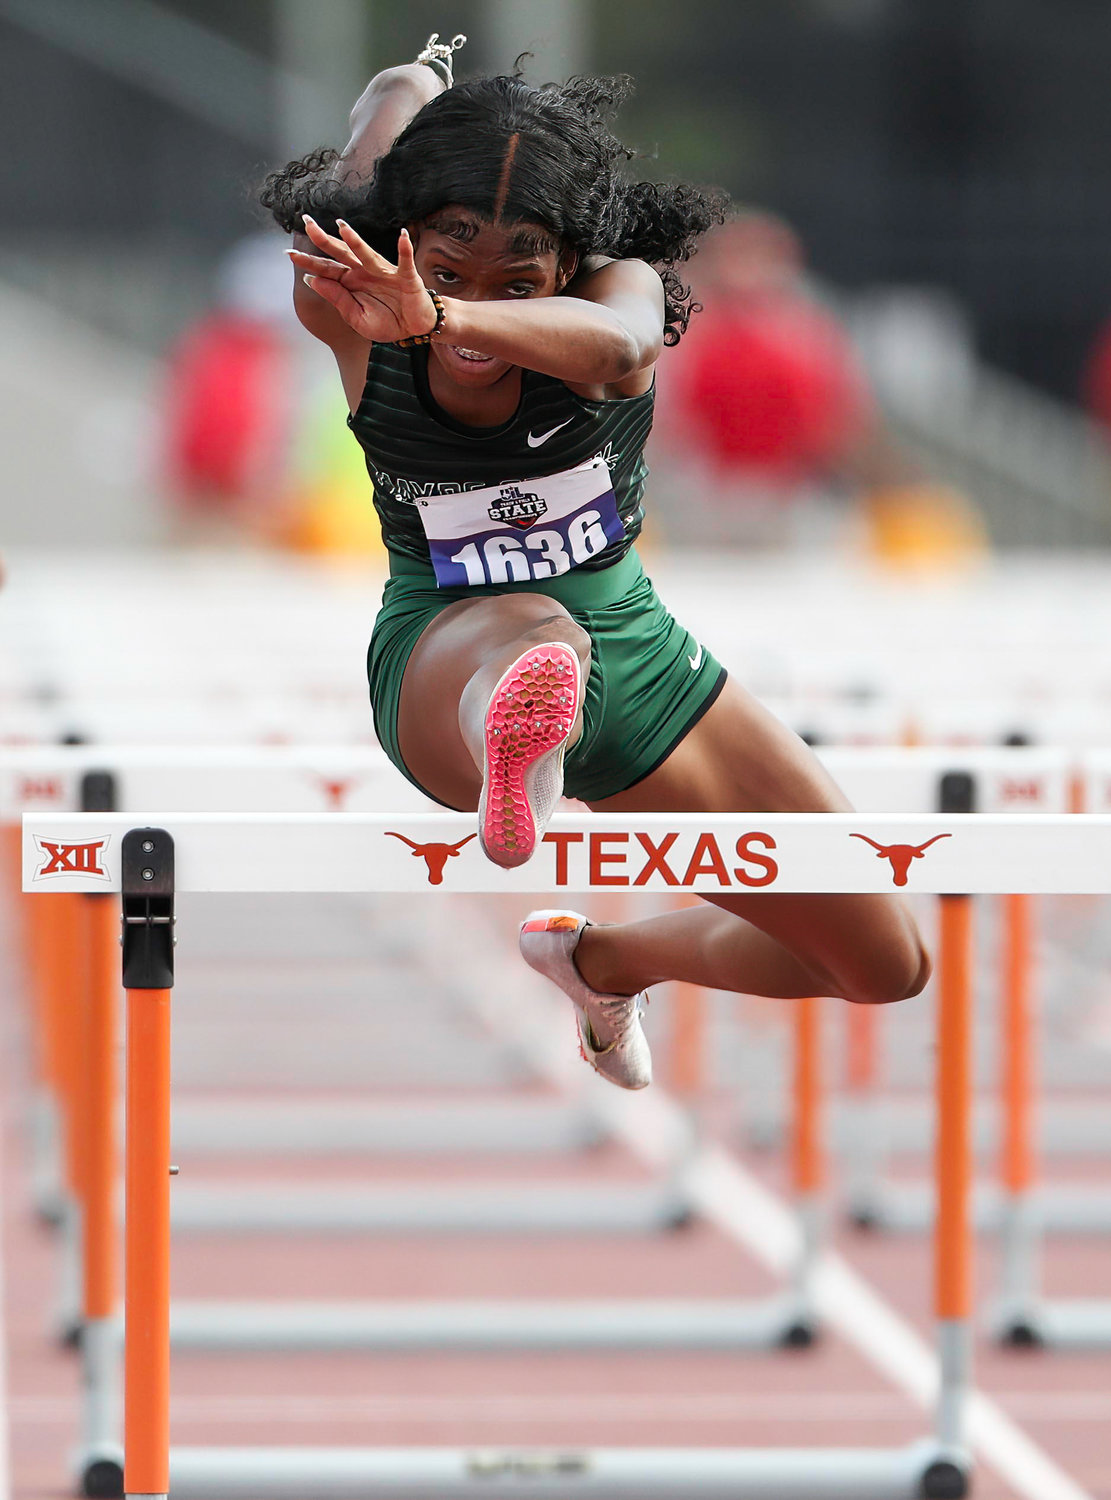 Simone Ballard of Mayde Creek runs in the Class 6A girls 100-meter hurdles at the UIL State Track and Field Meet on May 14, 2022 in Austin, Texas. Ballard earned a gold medal in the event with a time of 13.33.